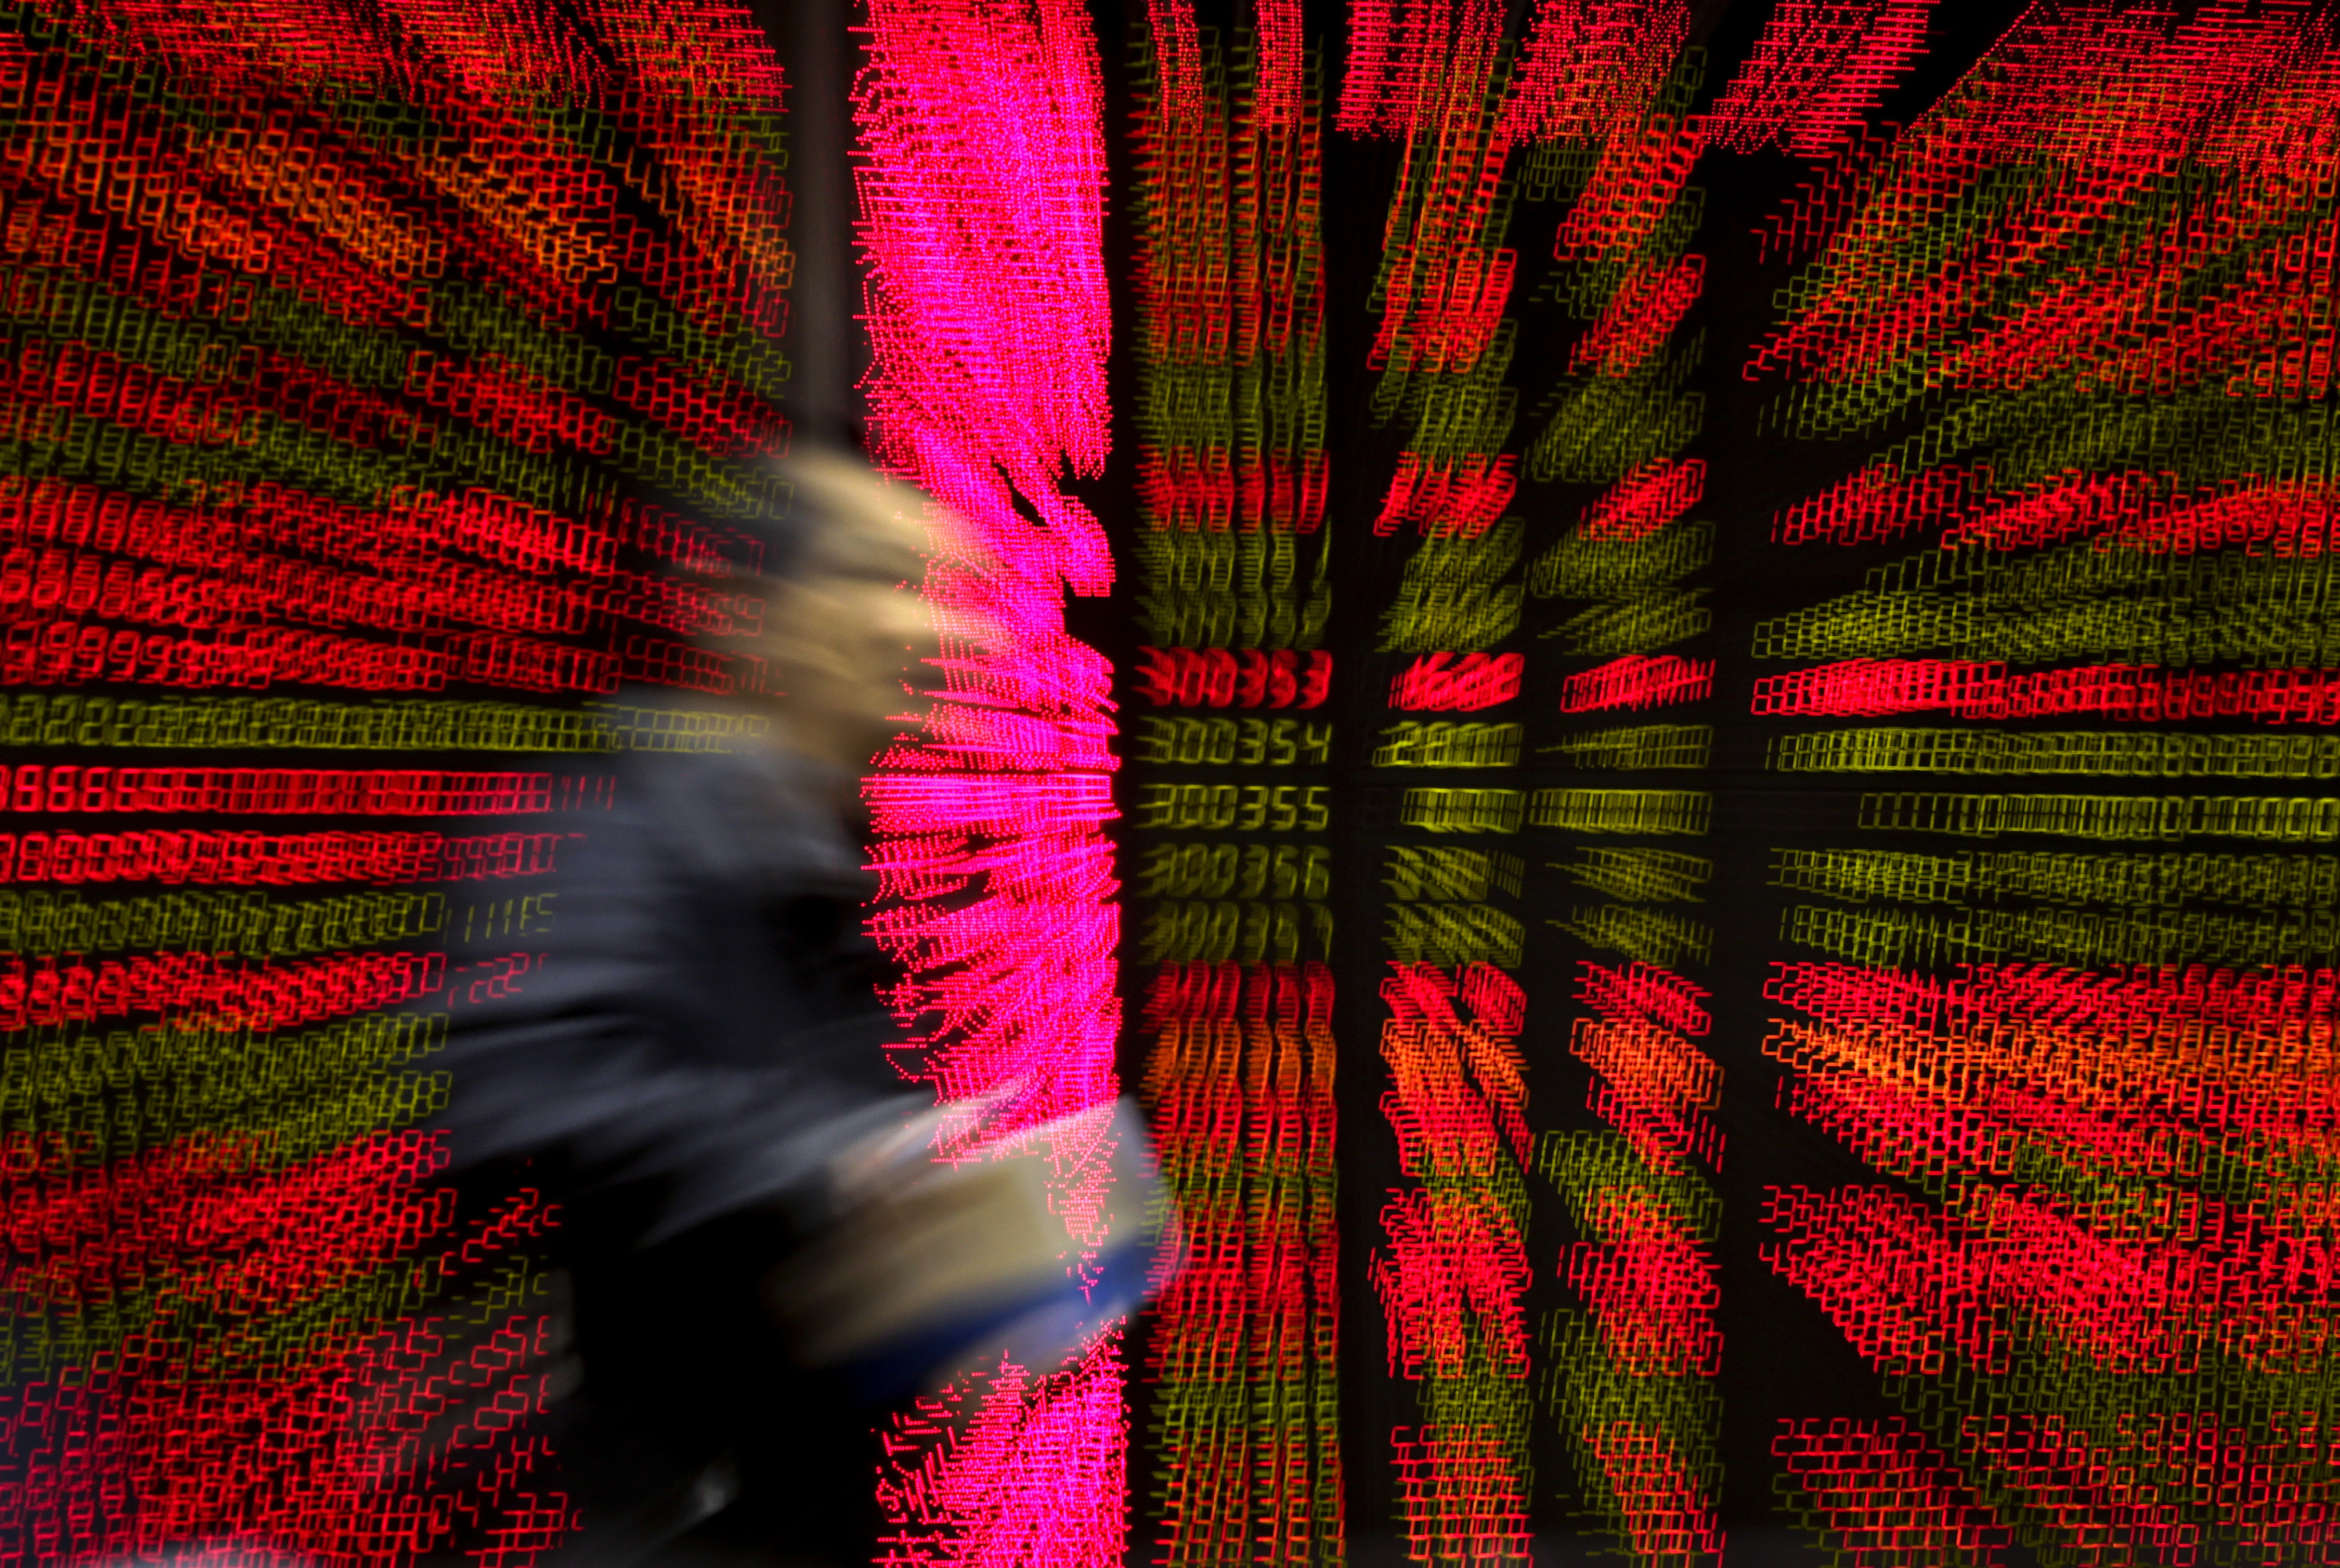 A man walks past an electronic board displaying stock prices at a brokerage house in Beijing, Tuesday, Jan. 12, 2016. Chinese stocks seesawed Tuesday as worries lingered over the country's financial markets and economic outlook, fueling volatility in other Asian benchmarks. (AP Photo/Andy Wong)